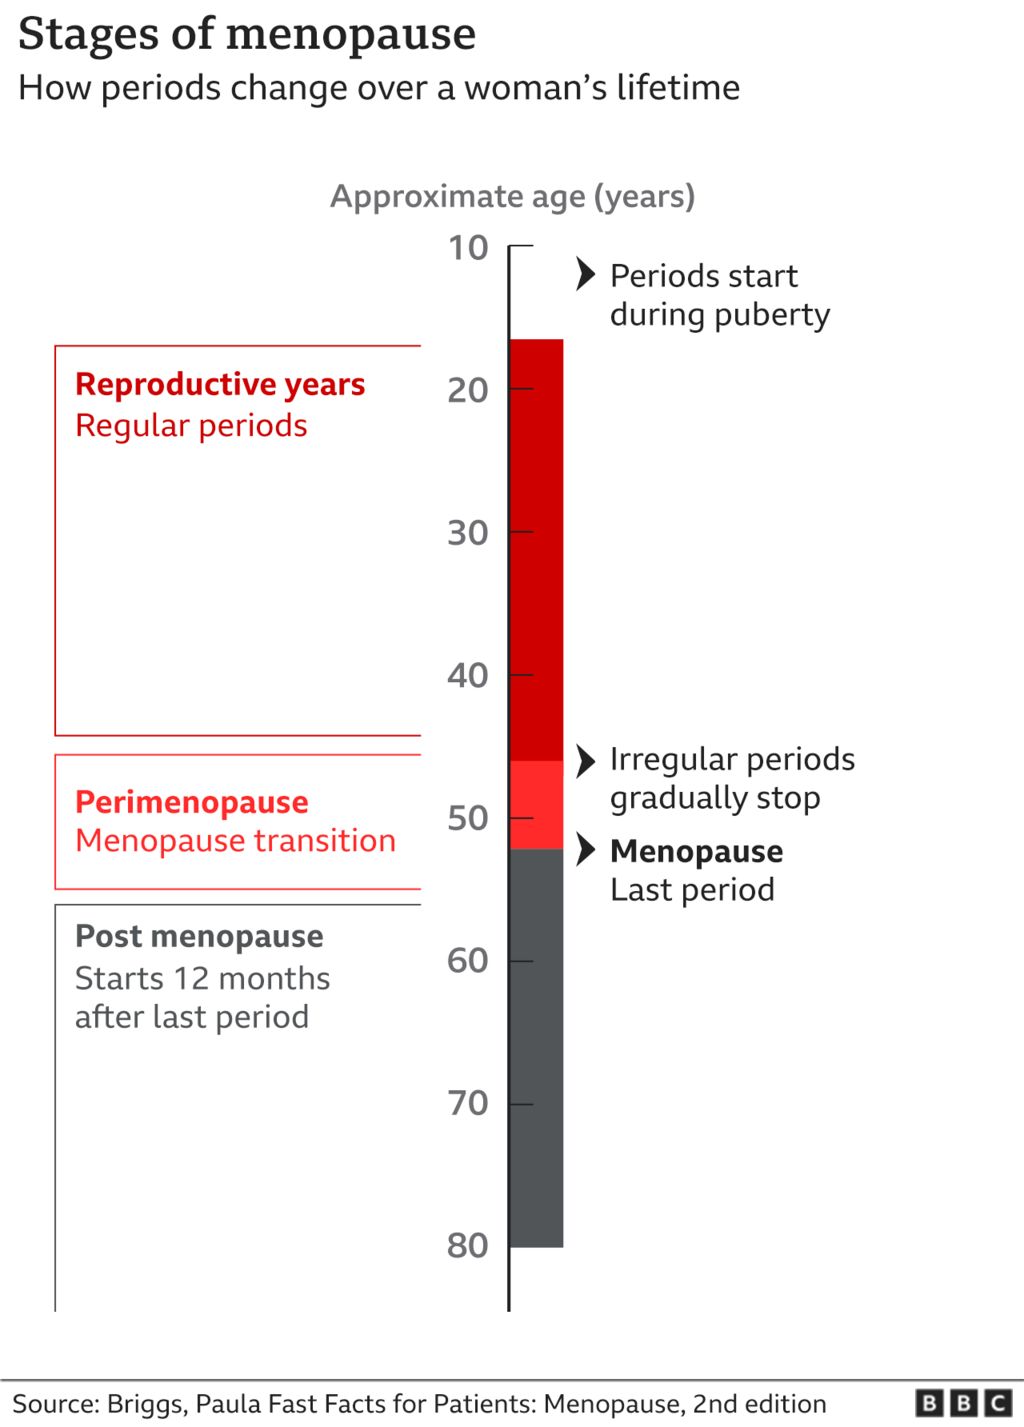 What are the different stages of the menopause? How long does the menopause last?